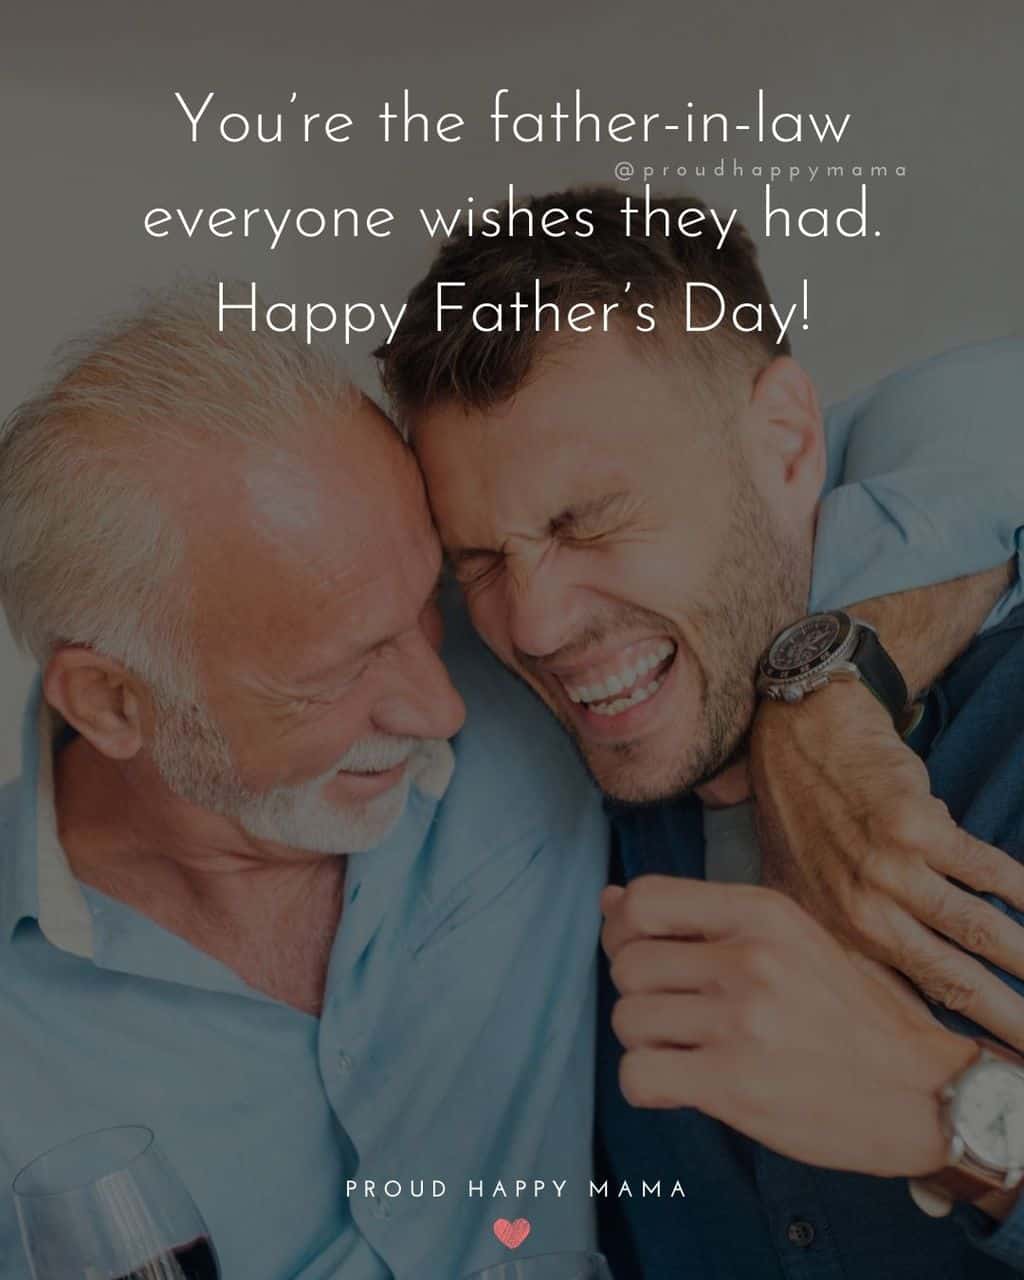 Happy Fathers Day Quotes For Father In Law - You’re the father in law everyone wishes they had. Happy Father’s Day!’